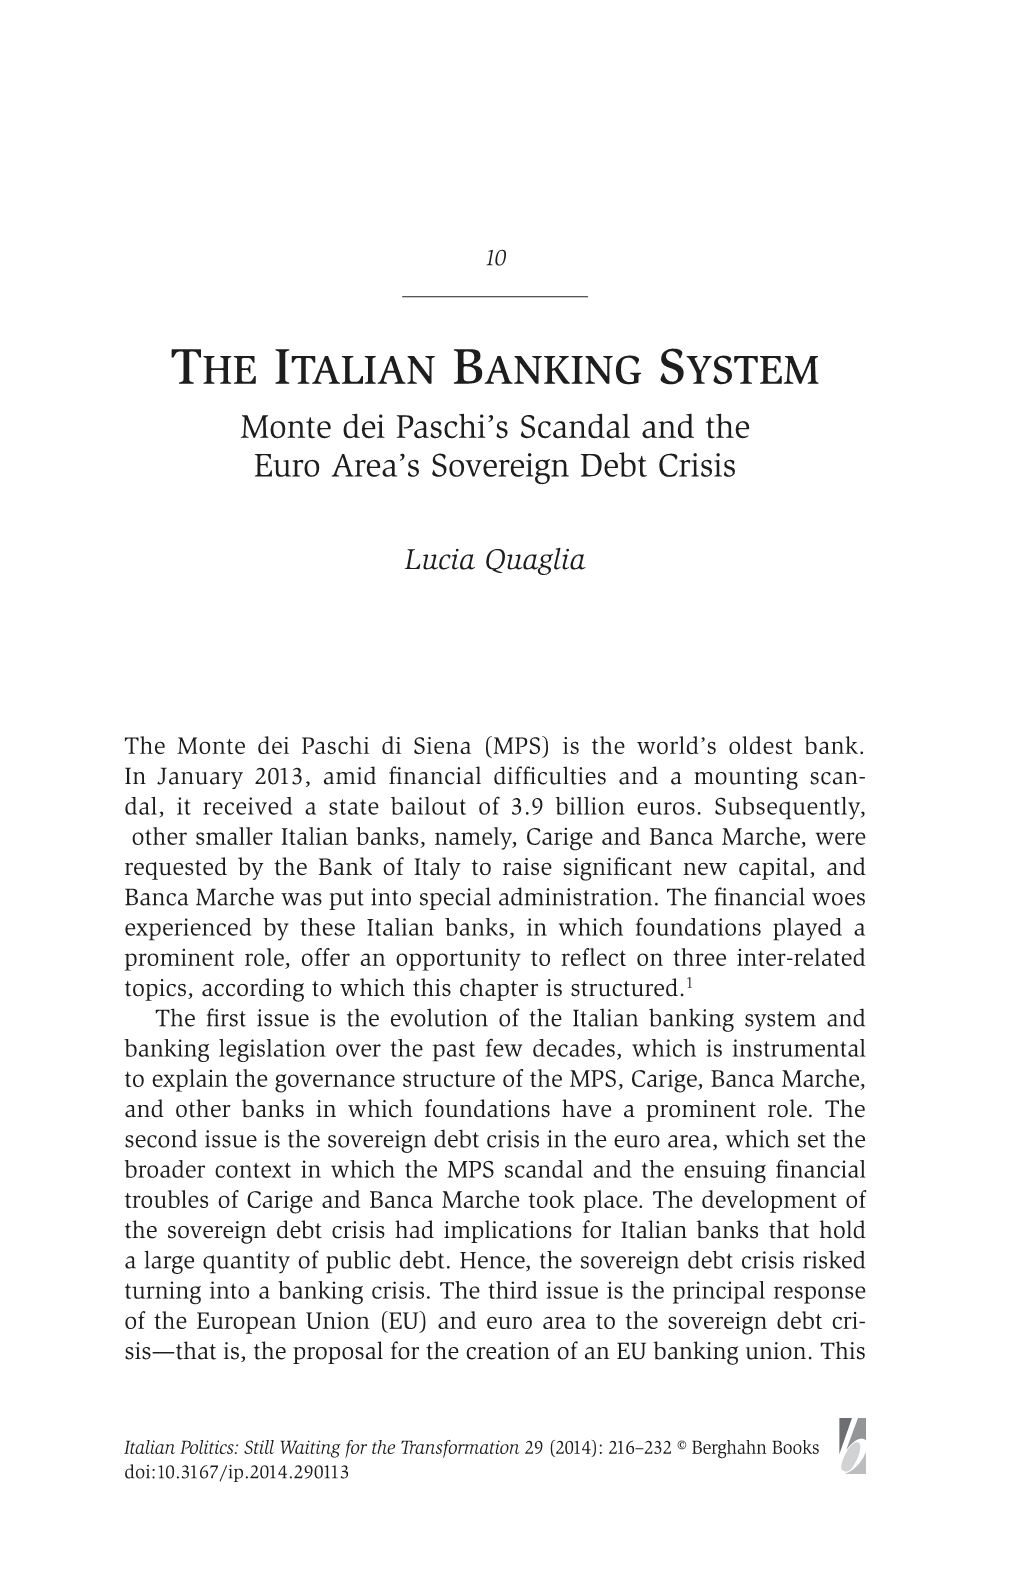 The Italian Banking System Monte Dei Paschi’S Scandal and the Euro Area’S Sovereign Debt Crisis